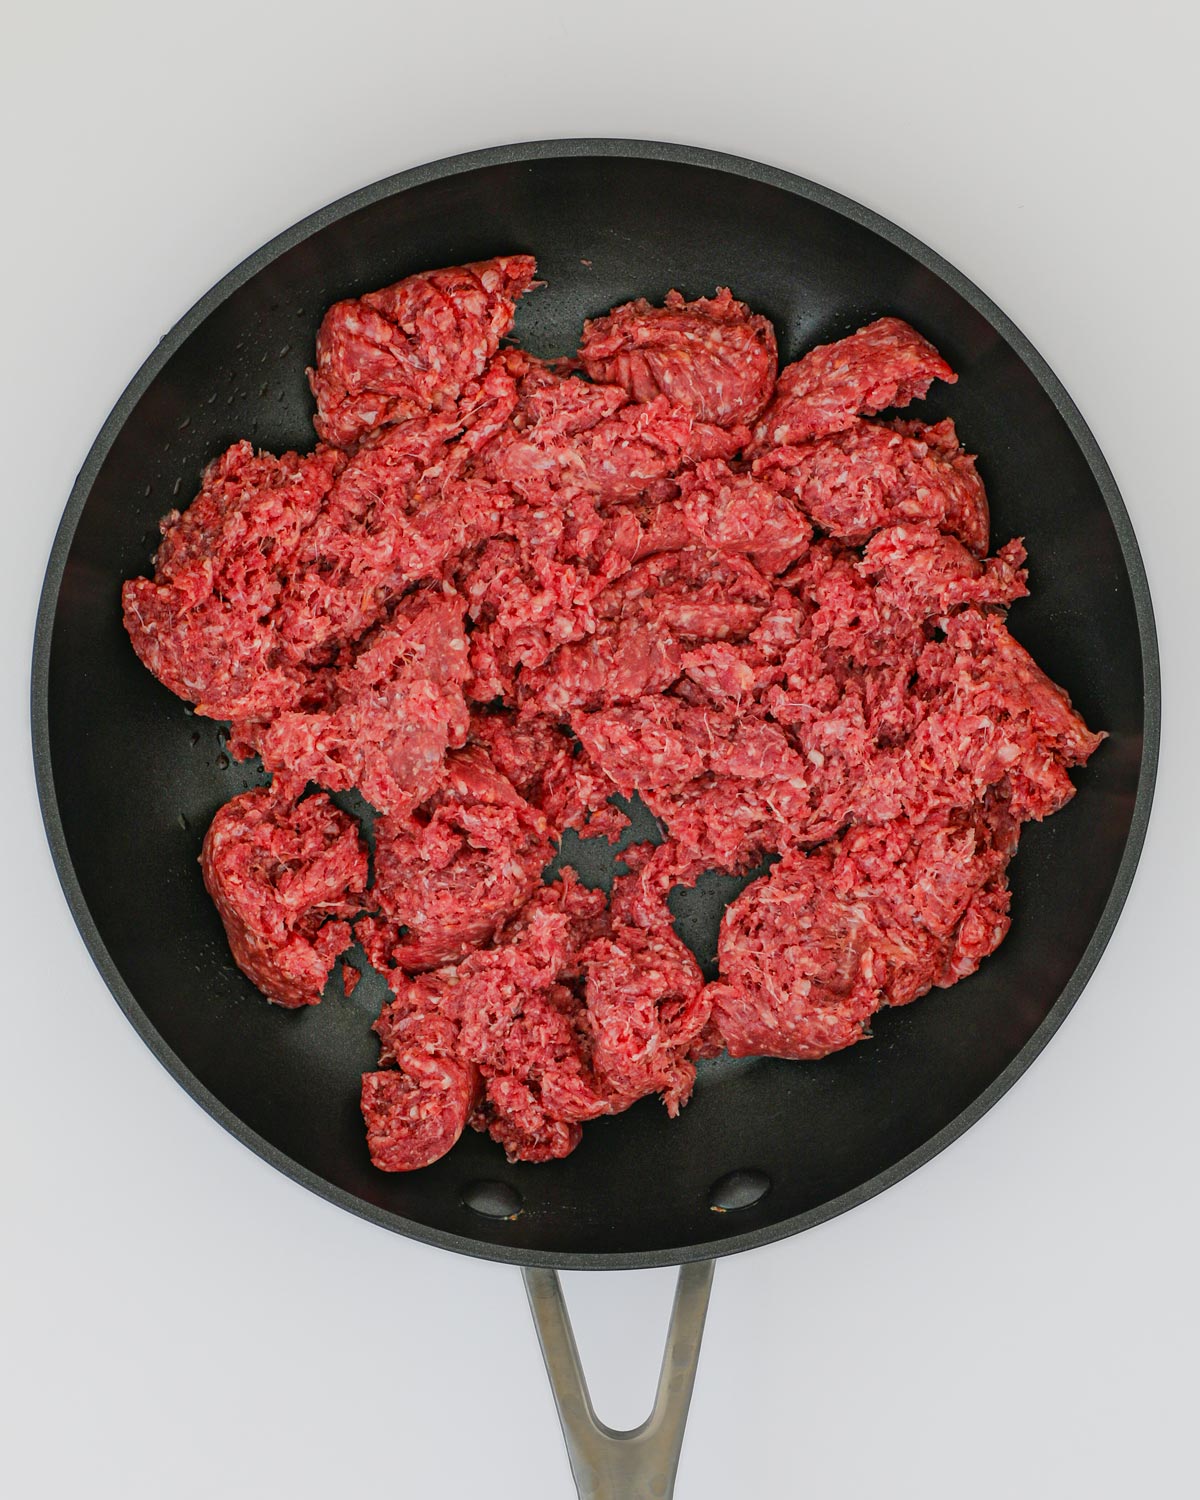 uncooked ground beef broken into chunks in a skillet.